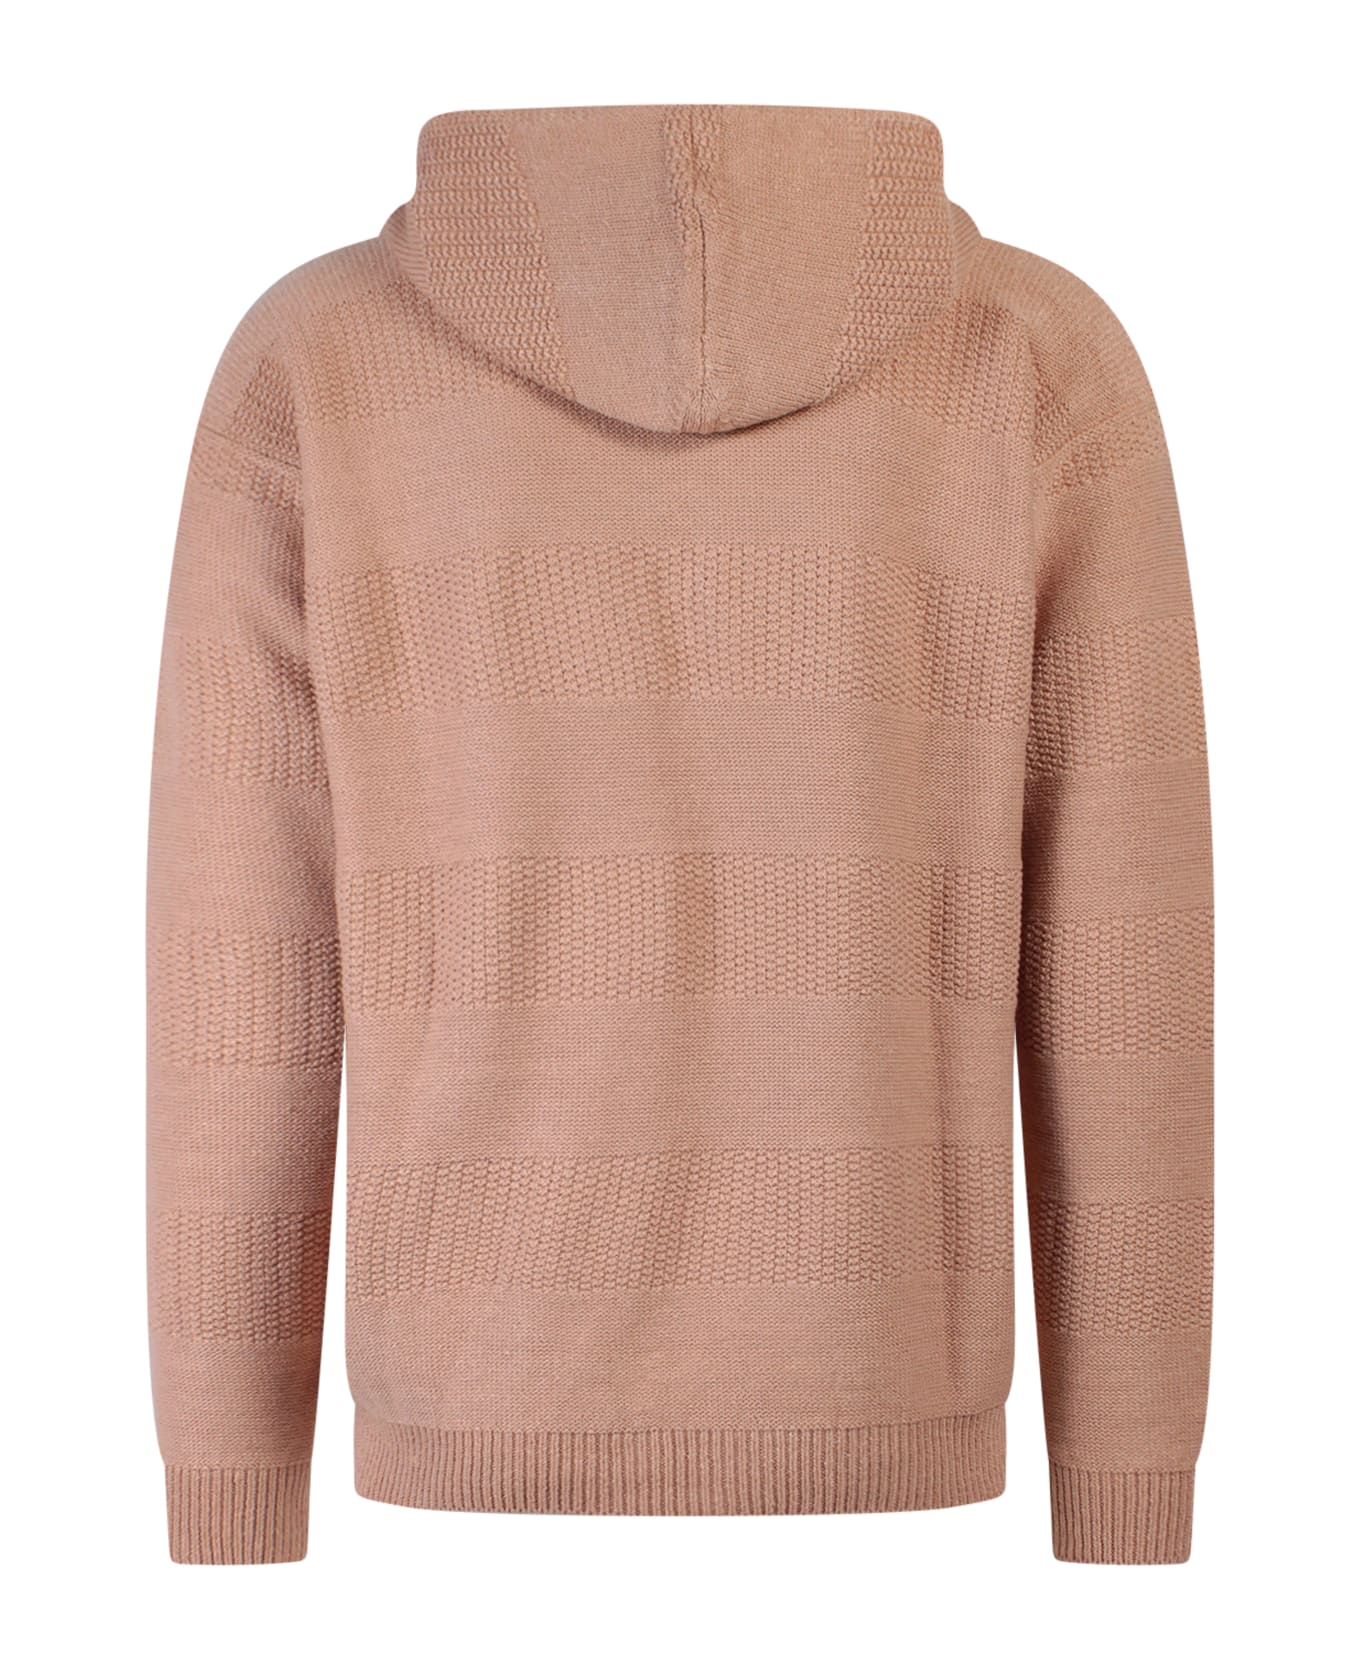 Nick Fouquet Sweater - Pink